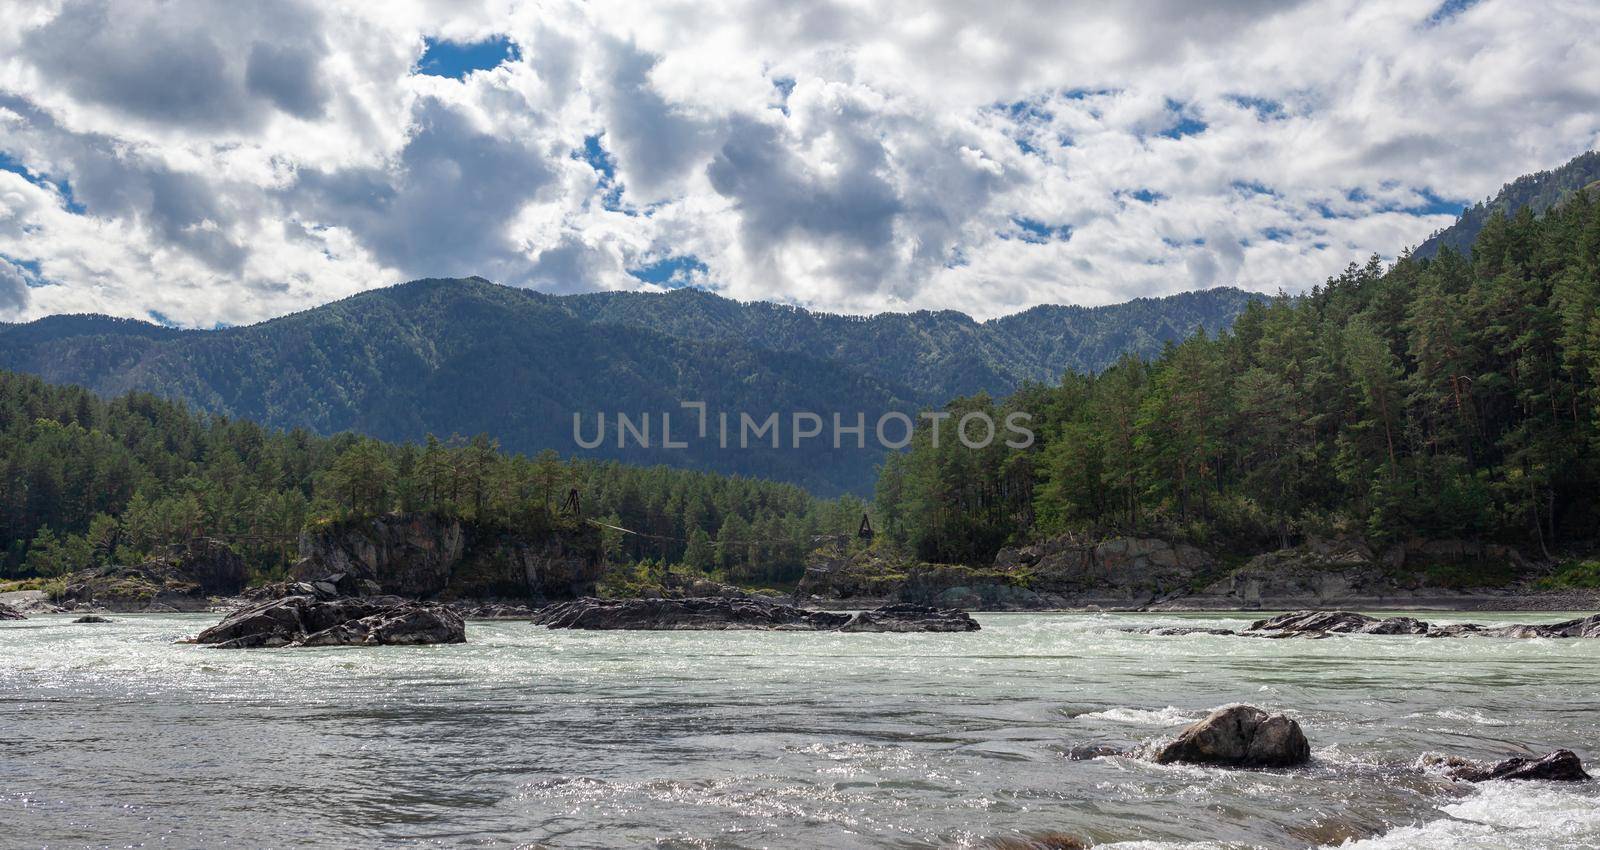 A fast-flowing wide and full-flowing mountain river. Large rocks stick out of the water. Big mountain river Katun, turquoise color, in the Altai Mountains, Altai Republic.